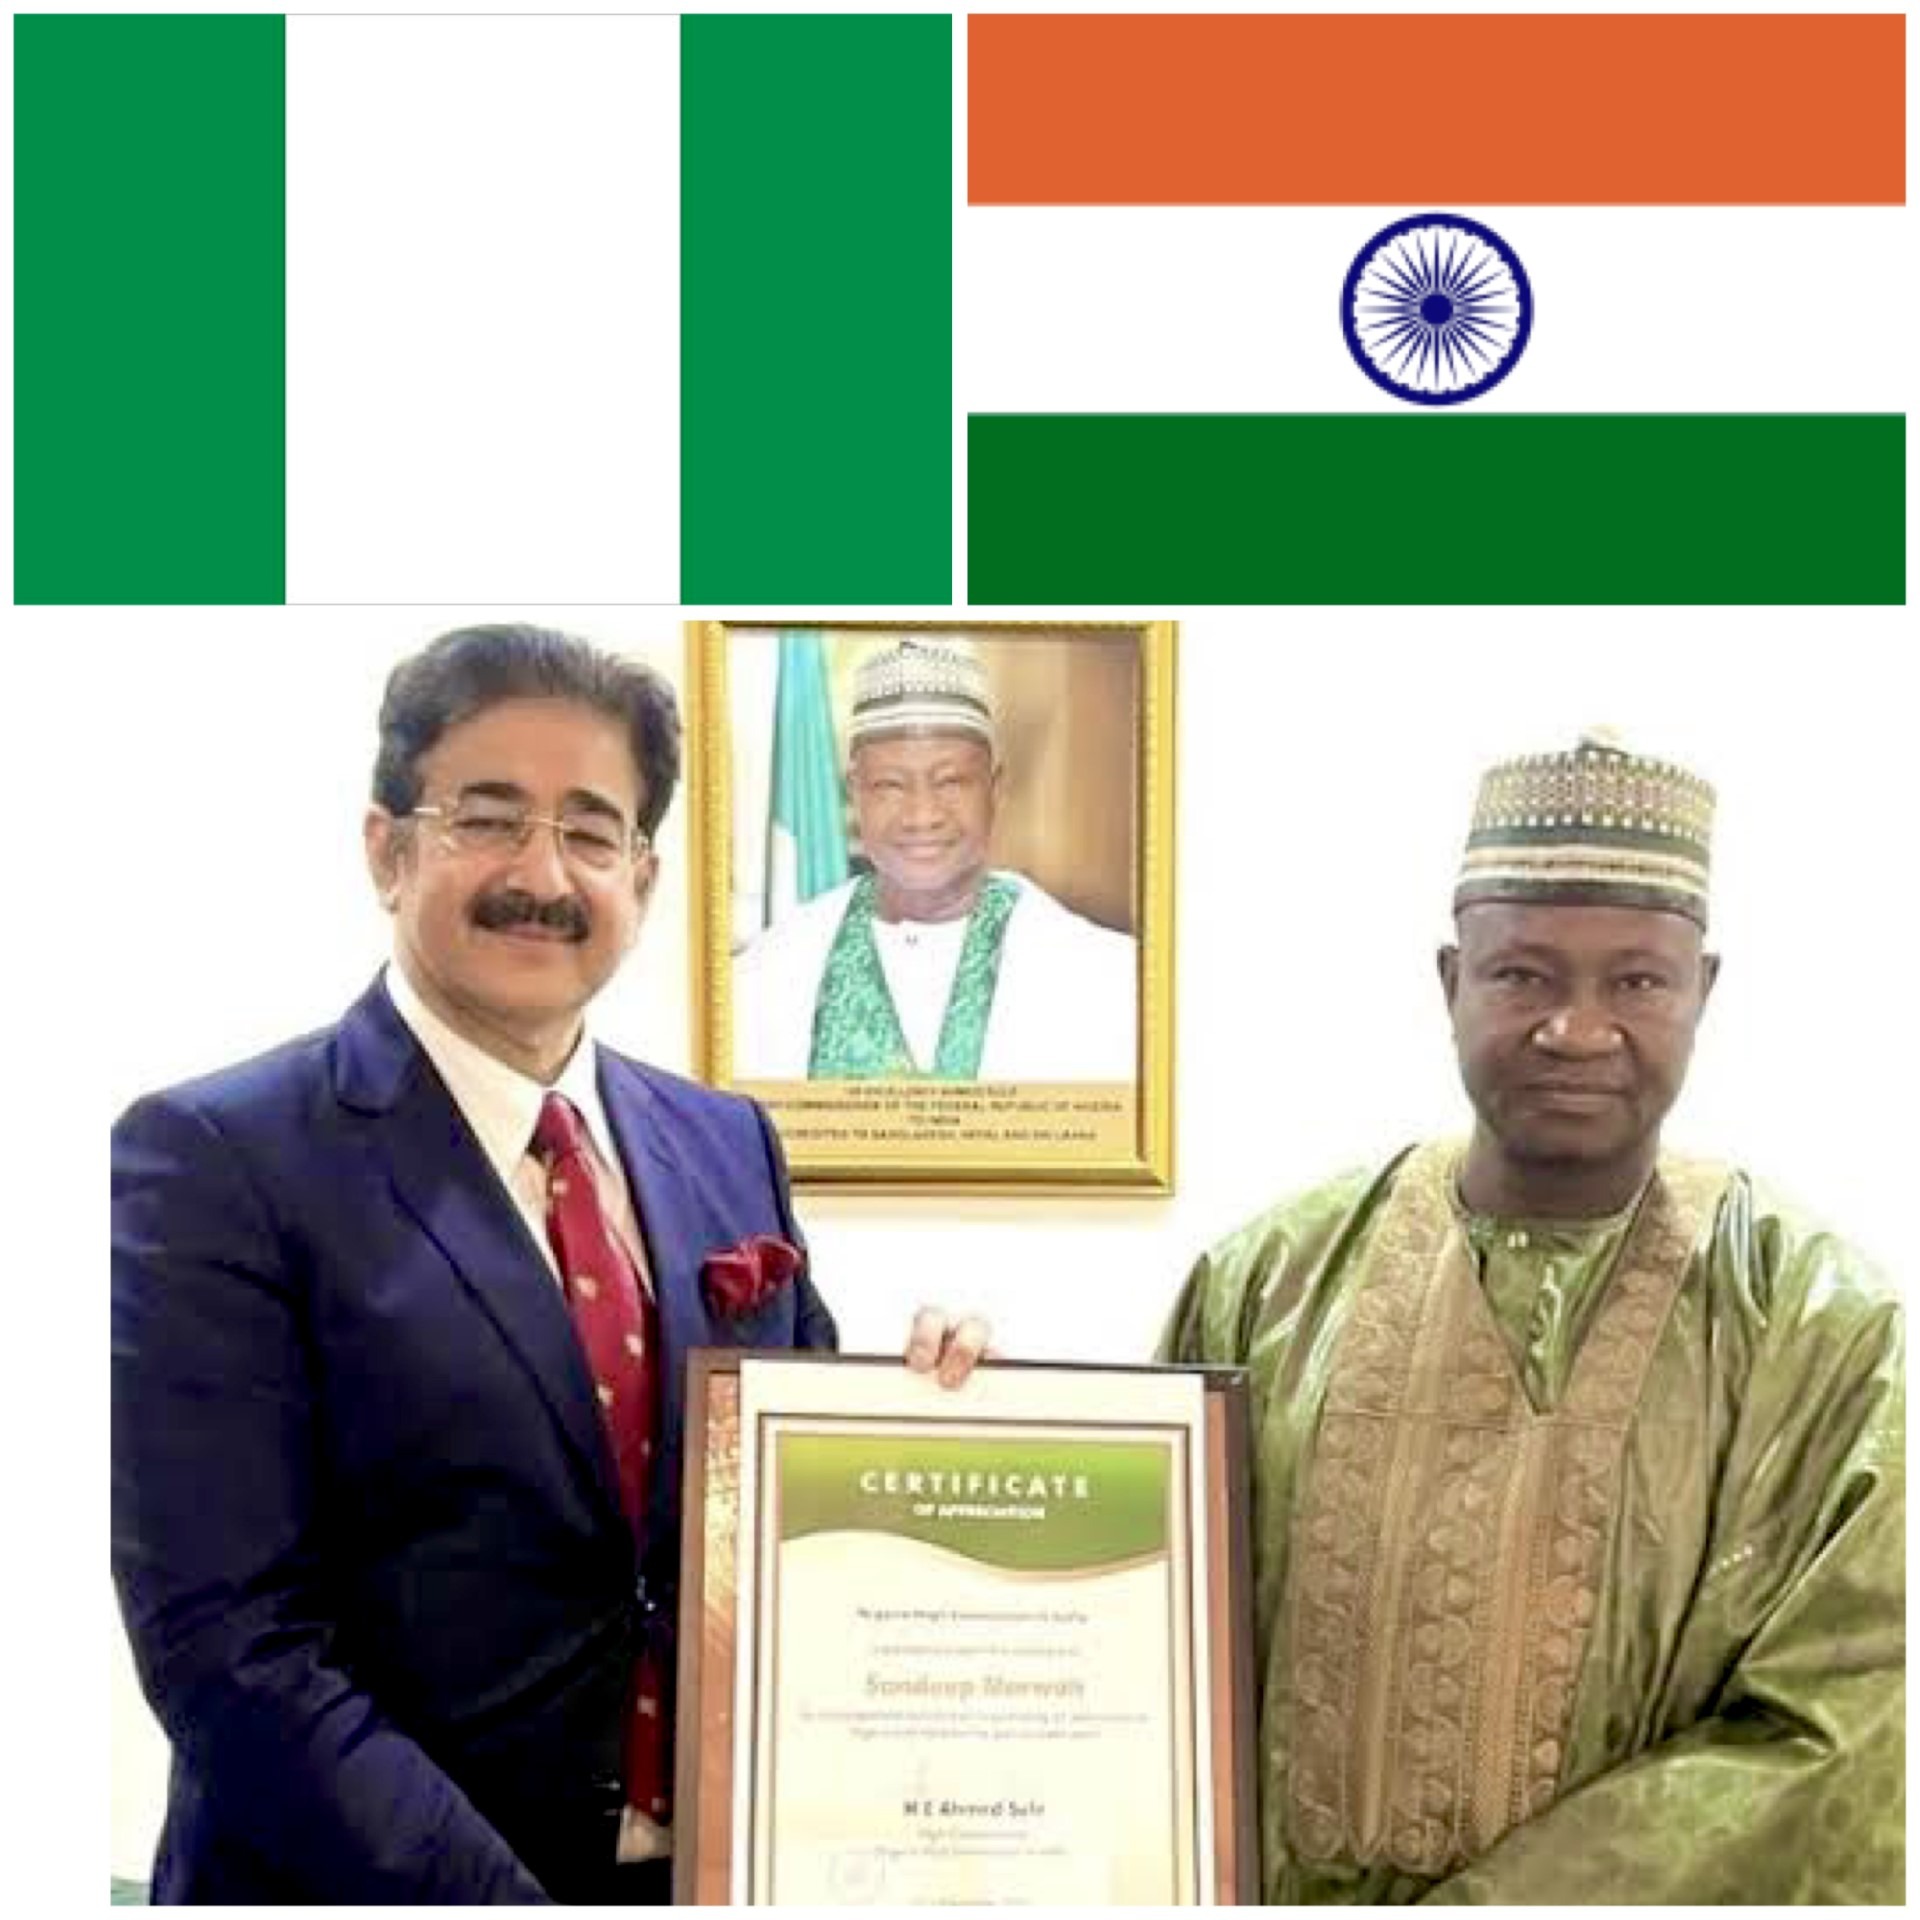 ICMEI Extends Warm Greetings to Nigeria on its National Day